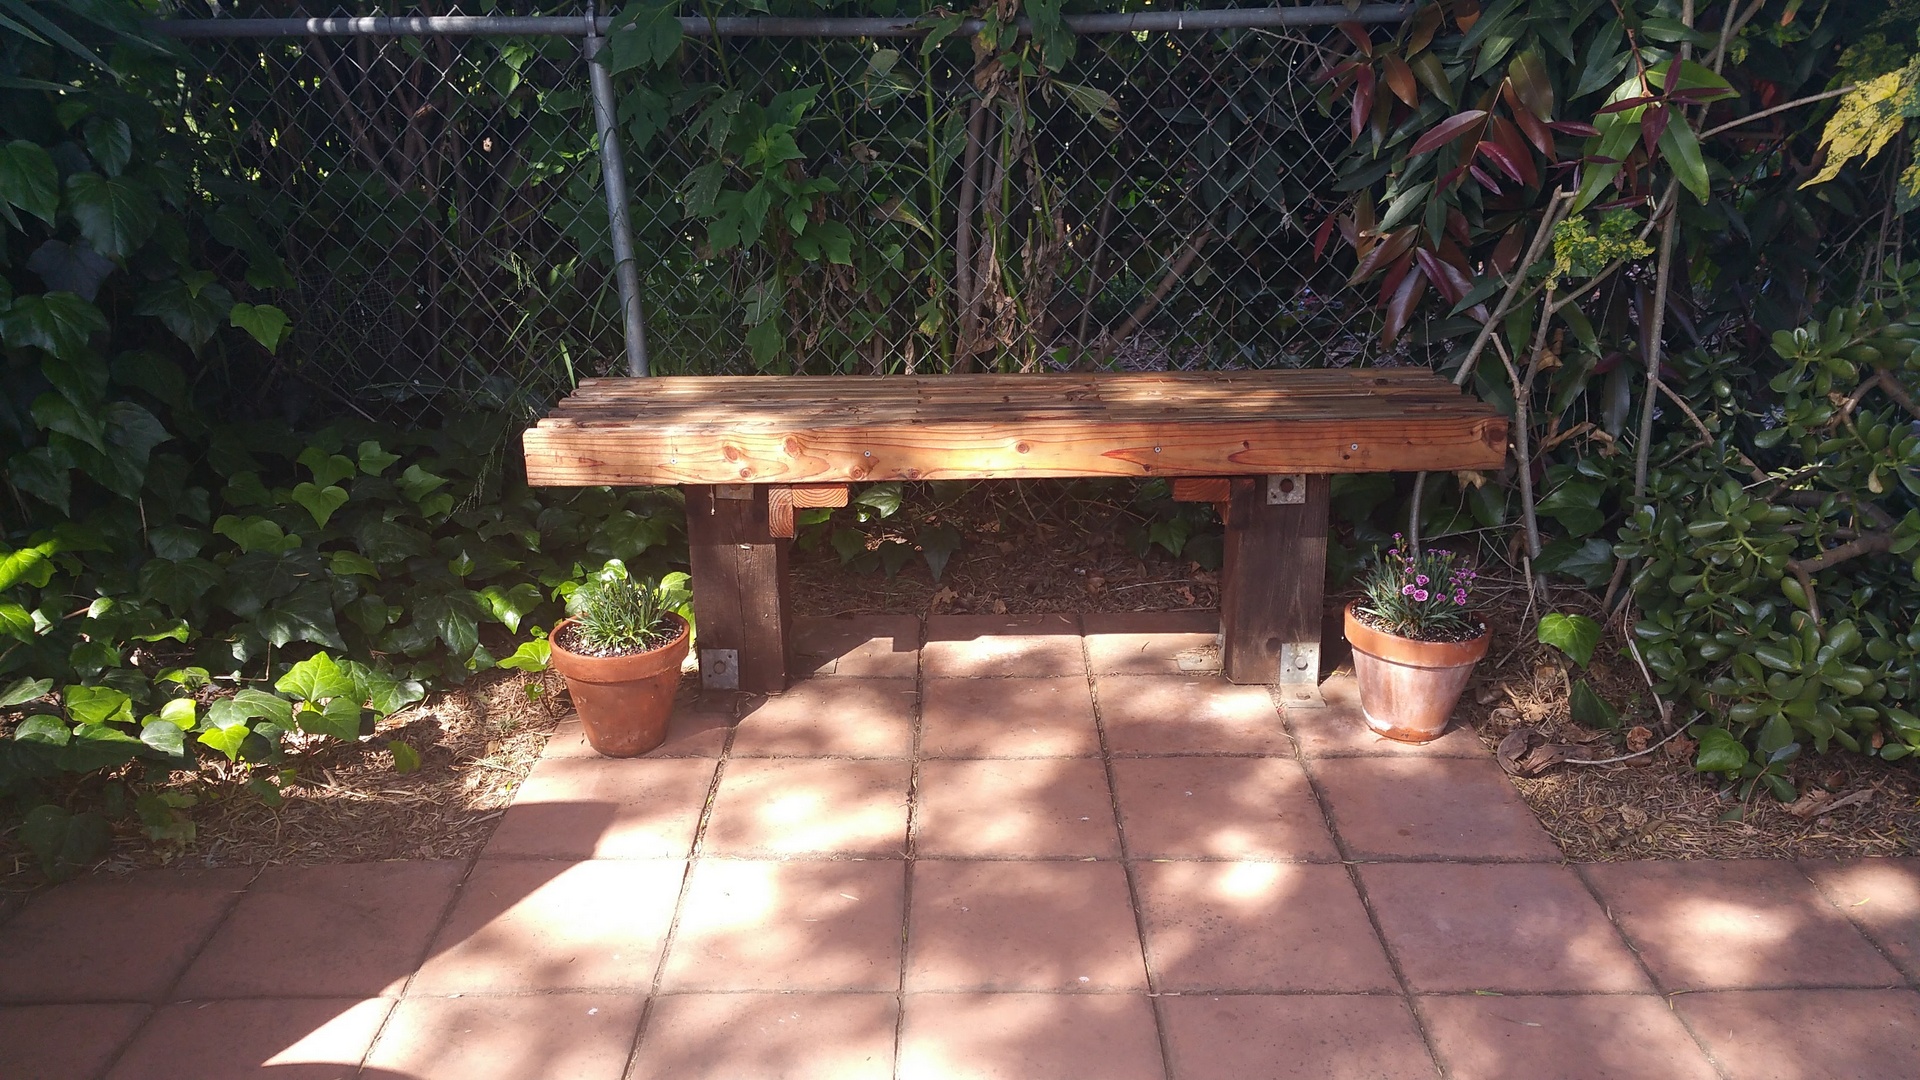 Finished bench ready for sitting